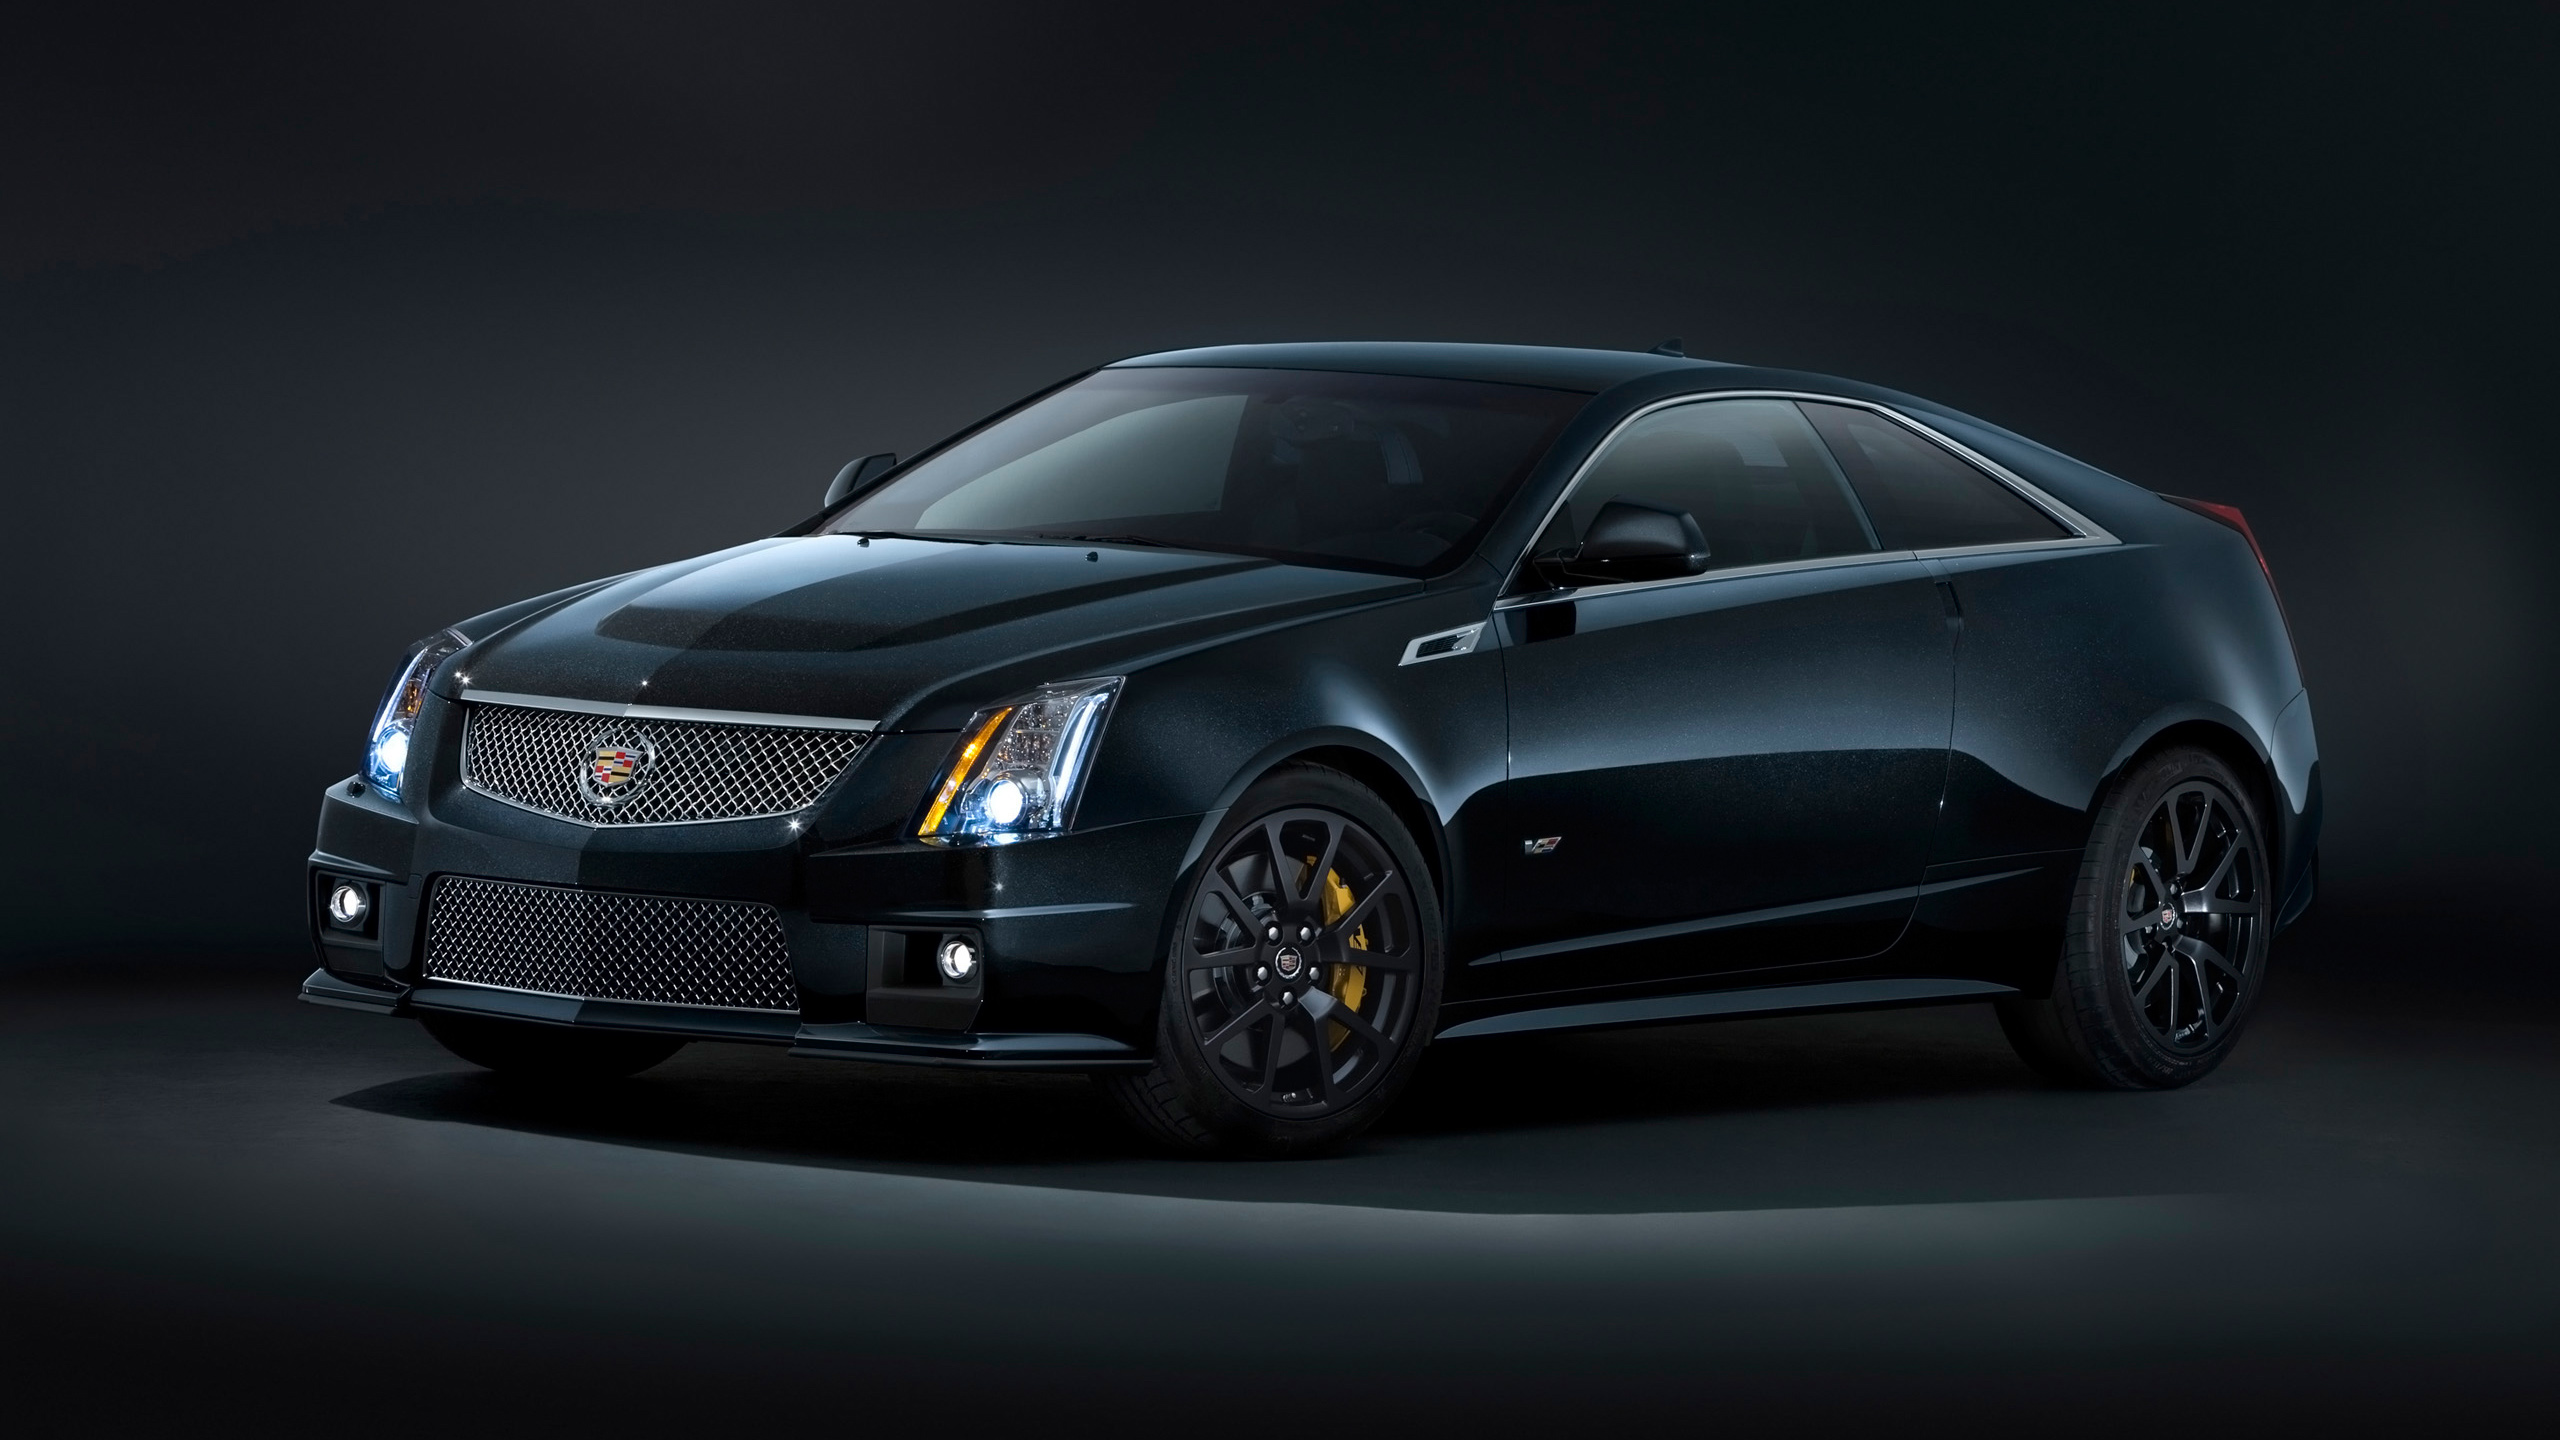 2014 Cadillac Cts V Coupe Wallpaper Hd Car Wallpapers Id 3750